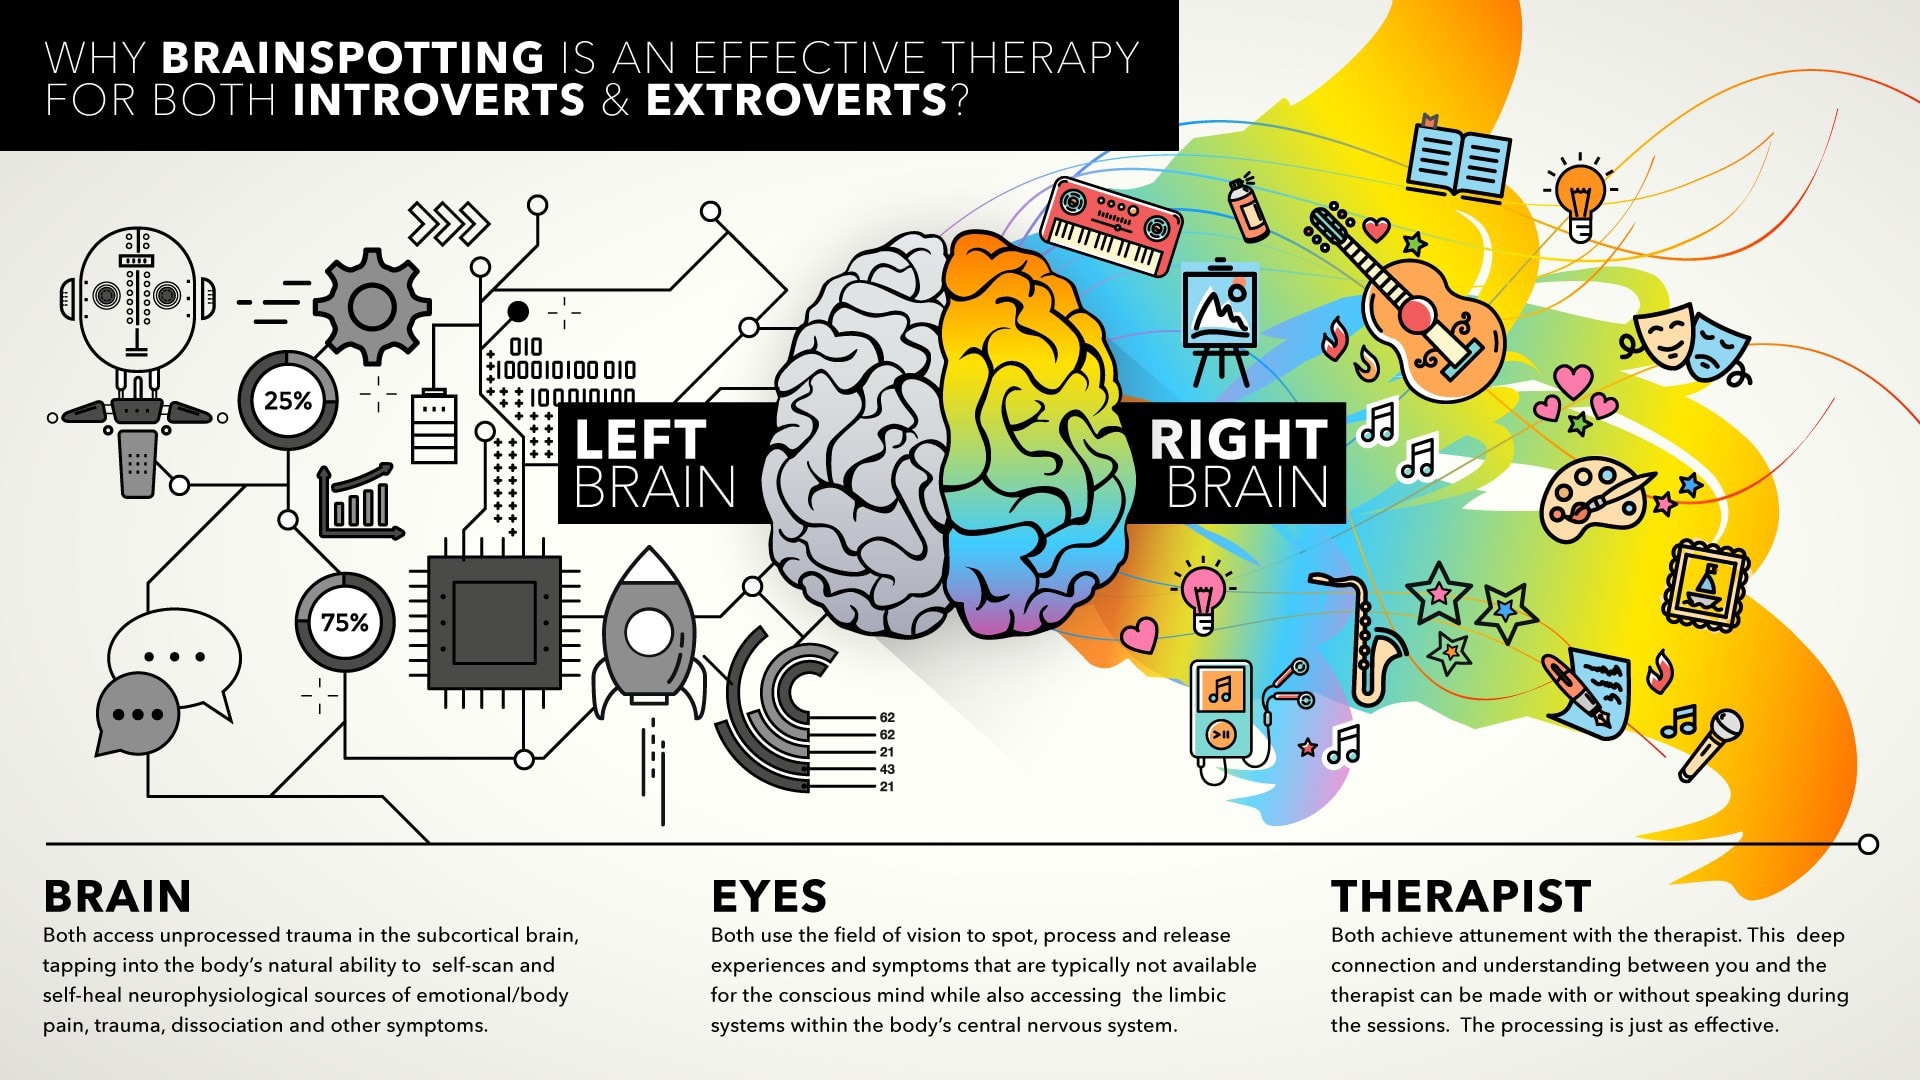 Infographic on why brainspotting is an effective tool for both introverts and extroverts